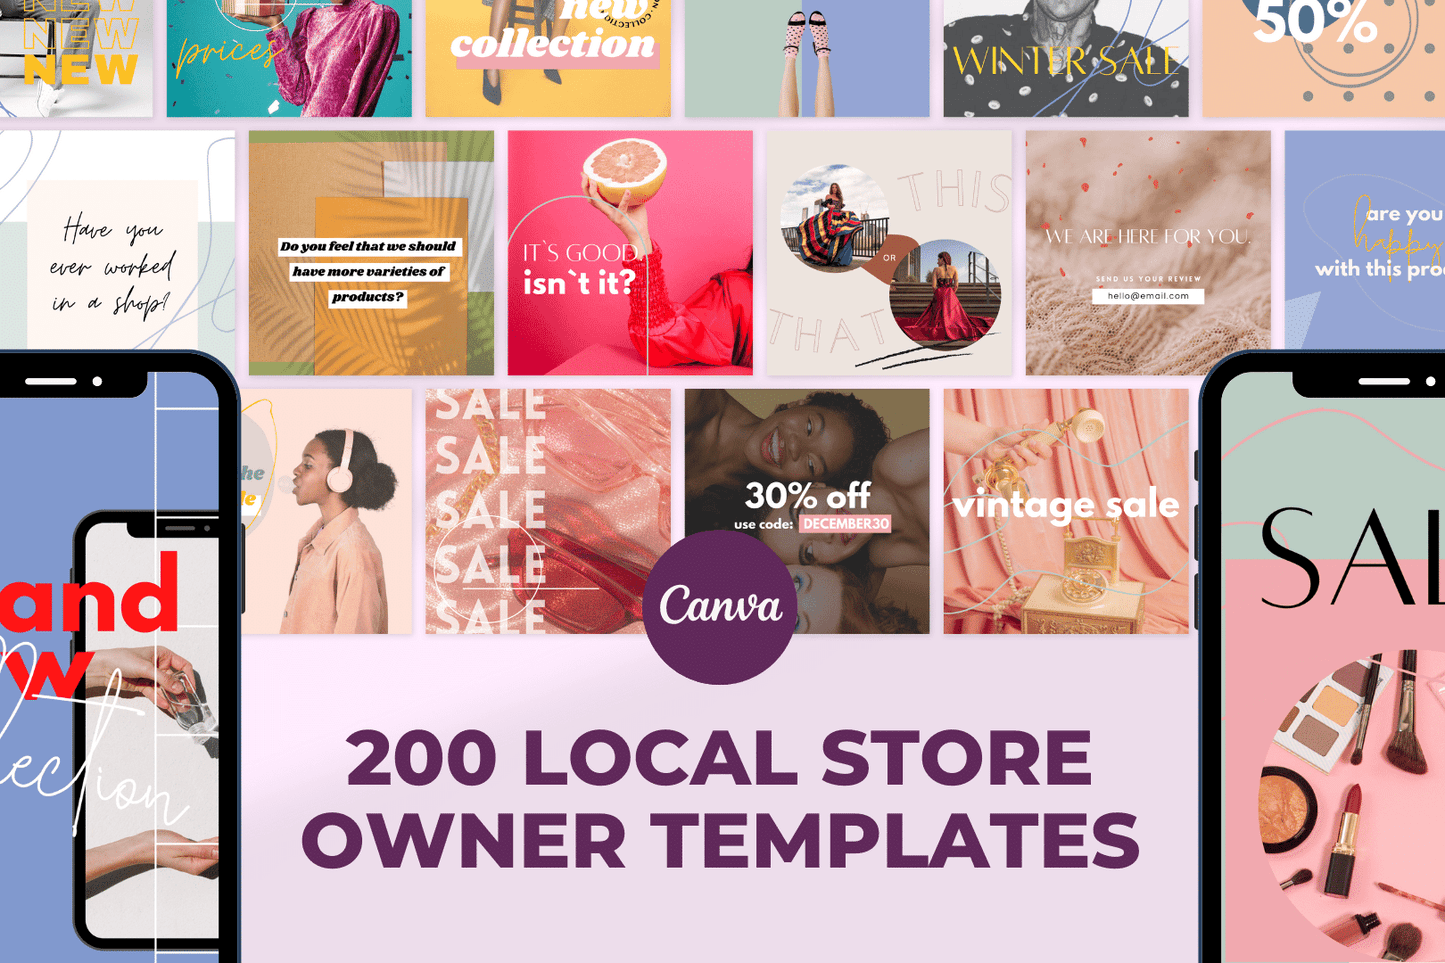 200 Local Store Owner Templates for Social Media